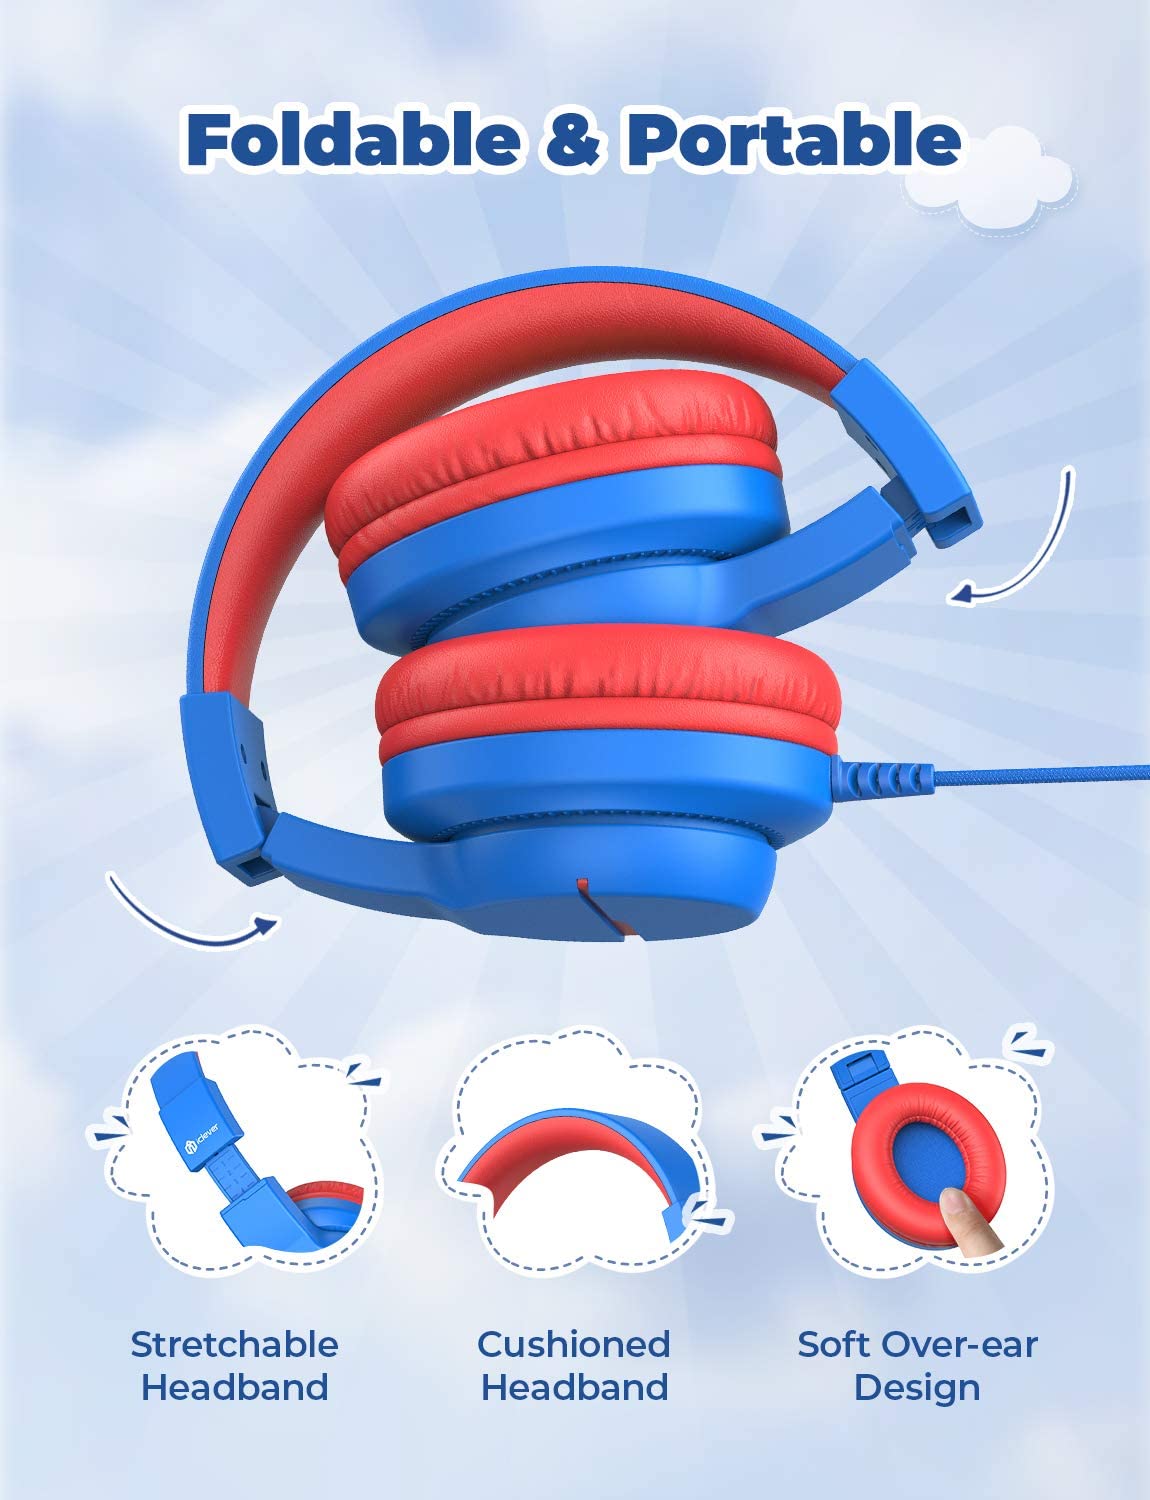 iClever HS19 Kids Headphones Blue with HD Microphone Stereo Sound Foldable Stretchable Headband 85dB / 94dB Volume Limiter